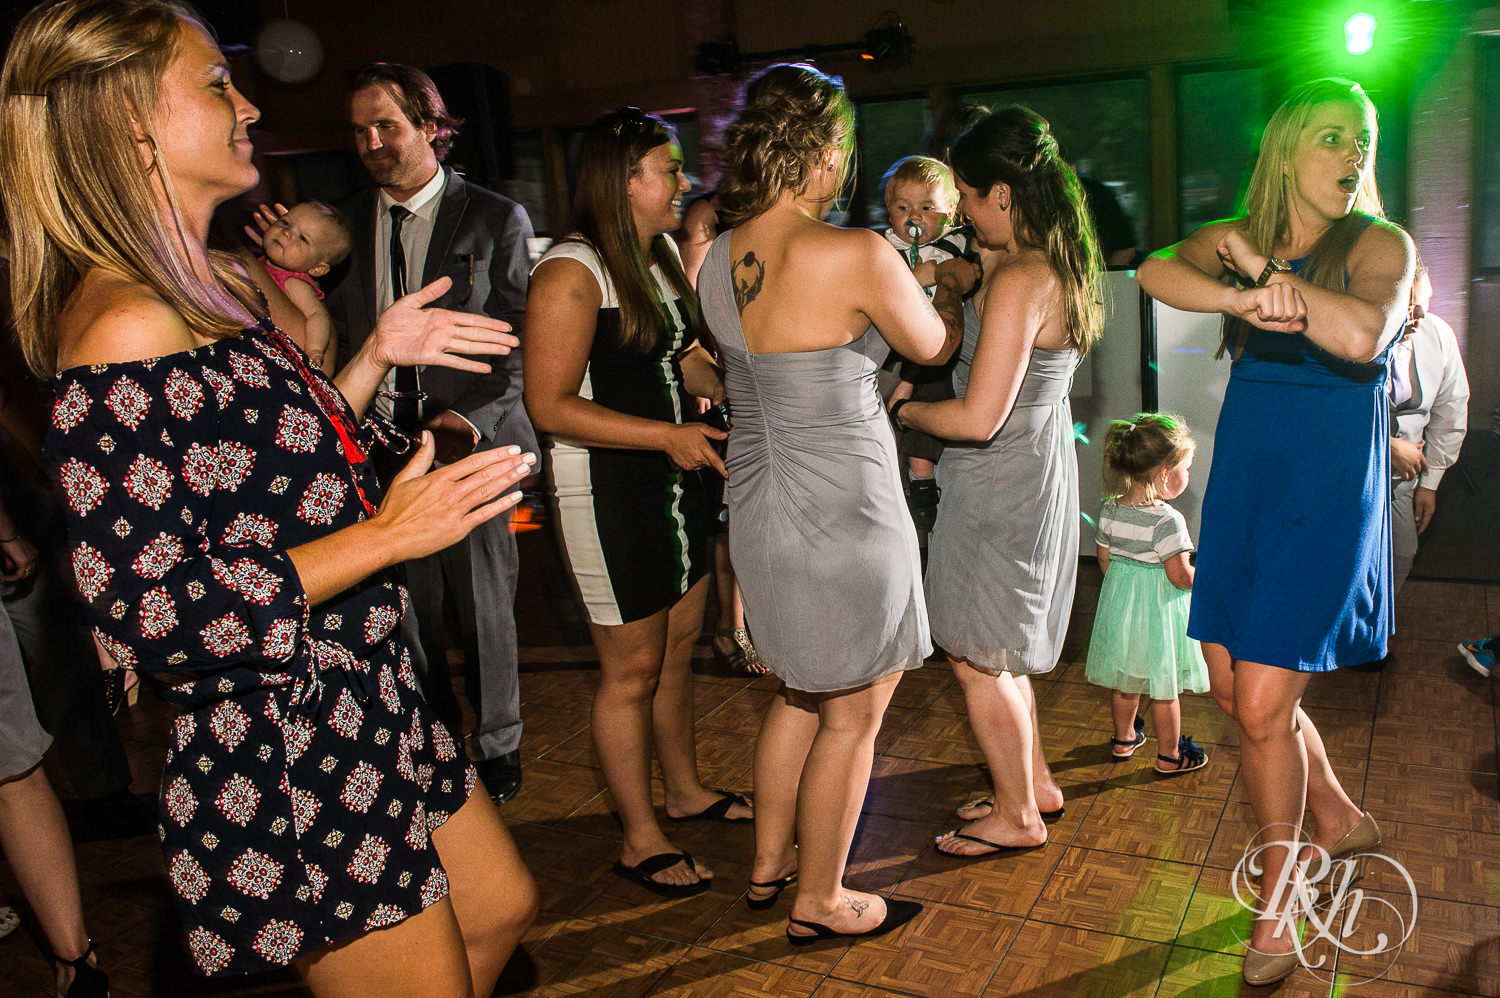 Lesbian brides and guests dance during their wedding reception at Spirit Mountain in Duluth, Minnesota.